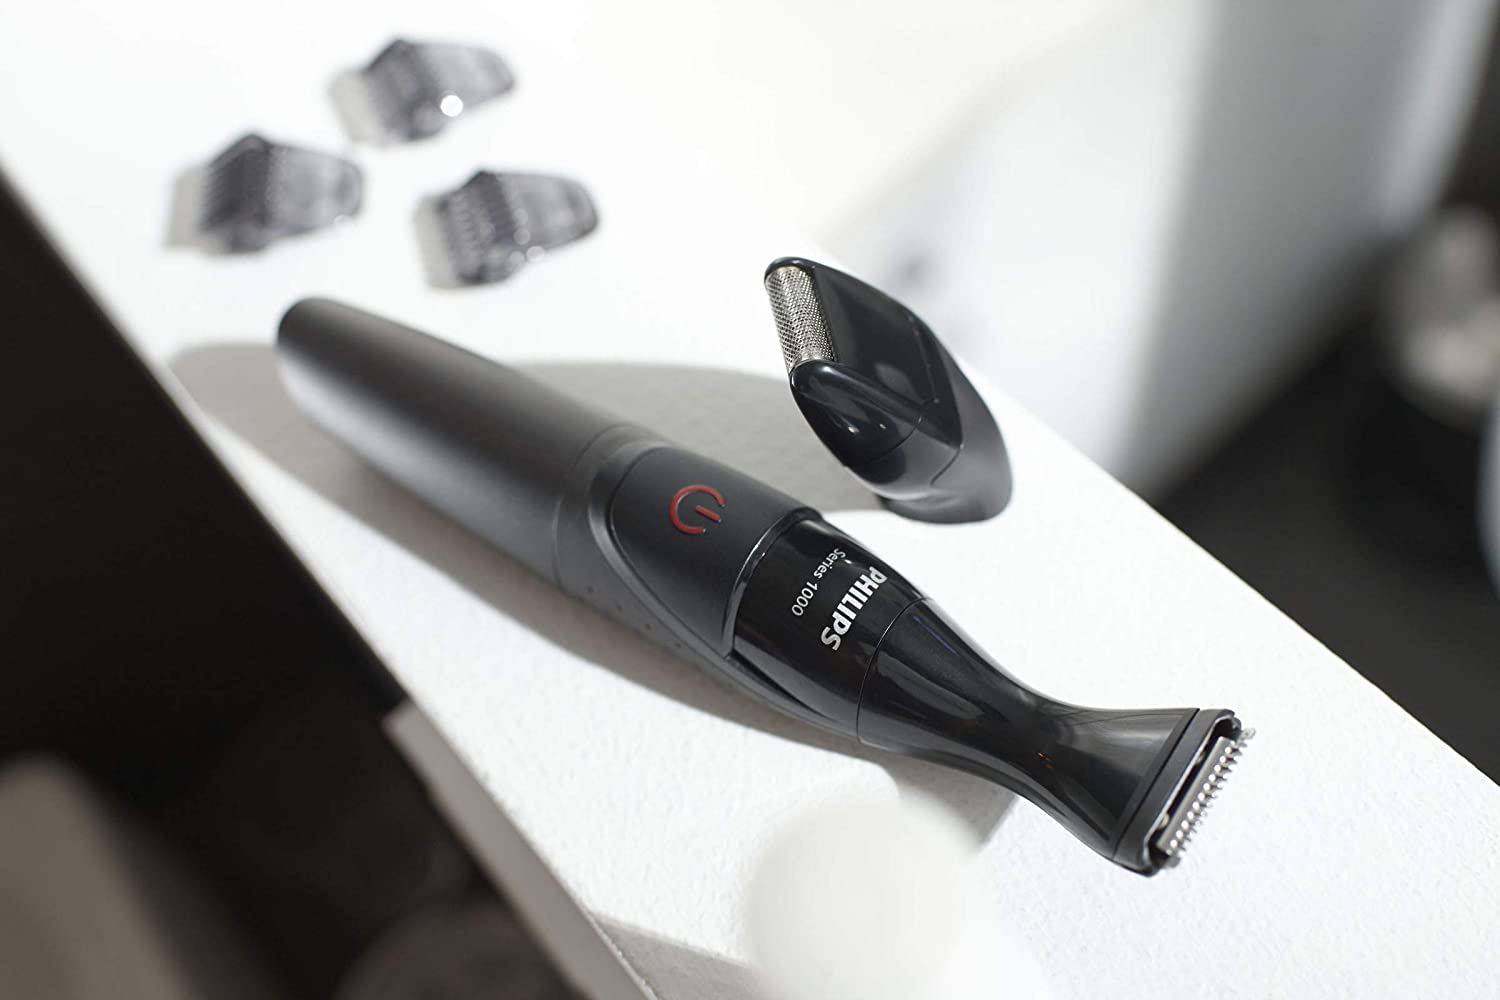 Philips Series 1000 Beard Styling Trimmer in Bahrain - Halabh